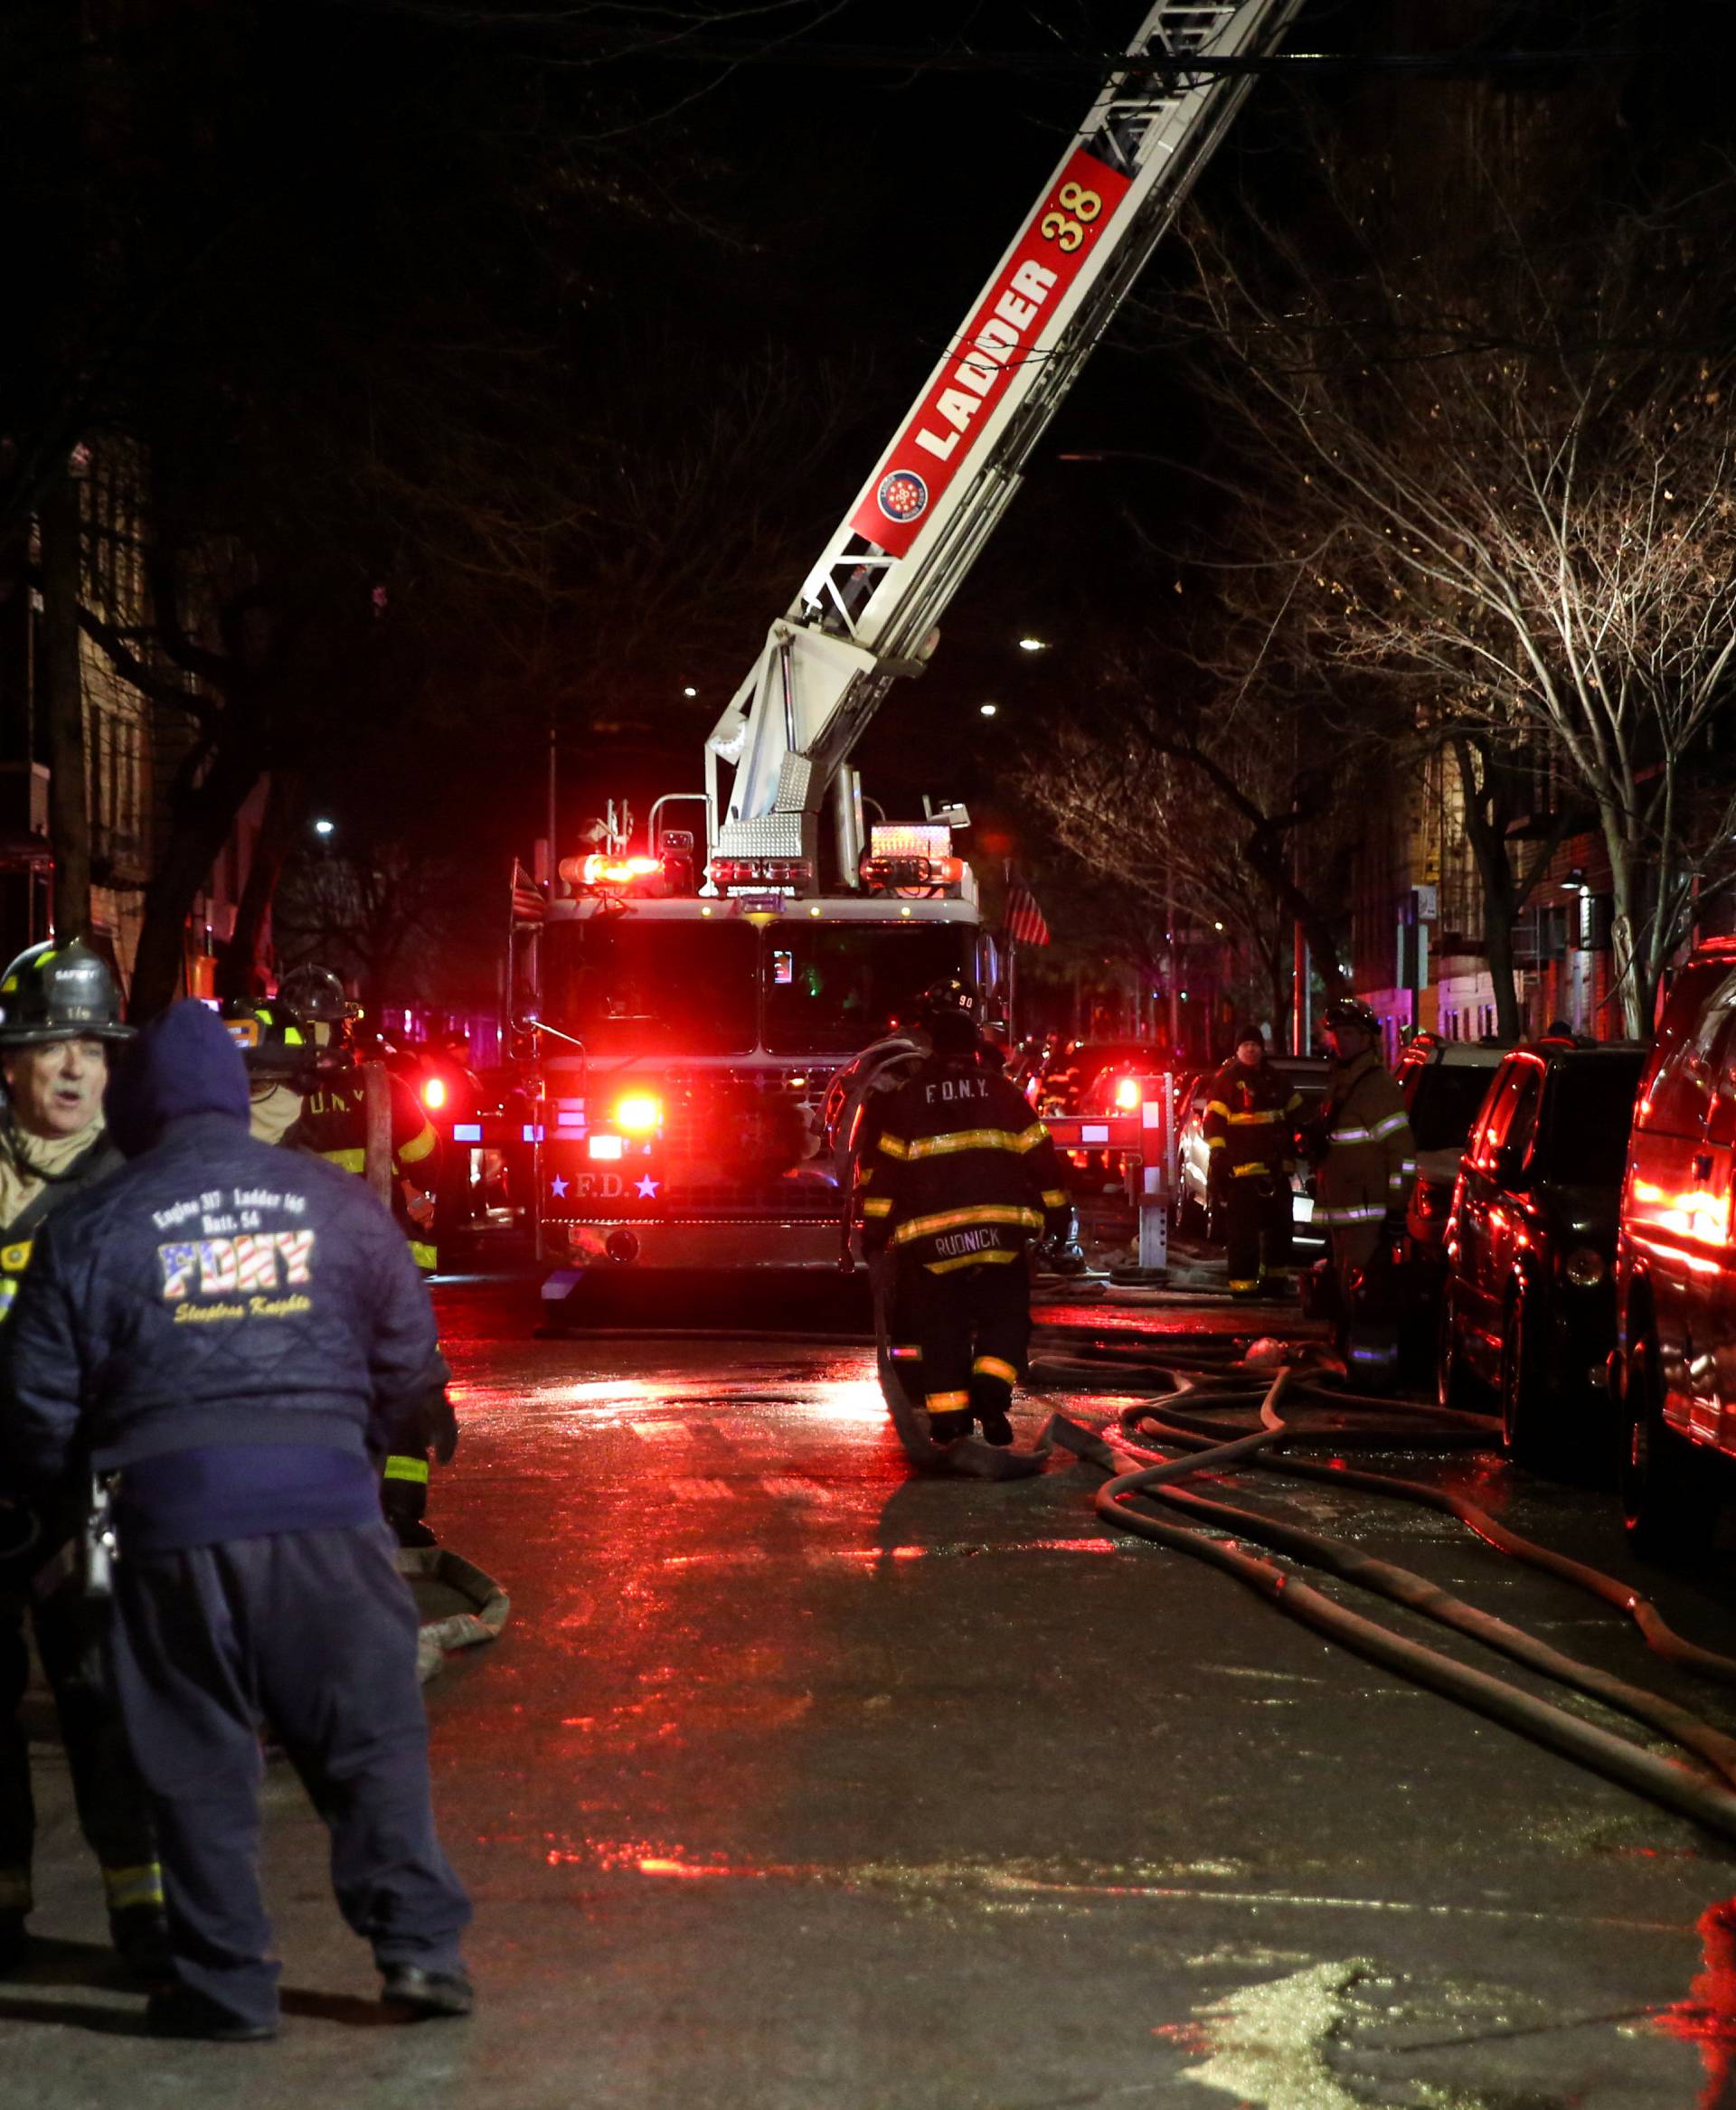 Fire Department of New York (FDNY) personnel work on the scene of an apartment fire in New York